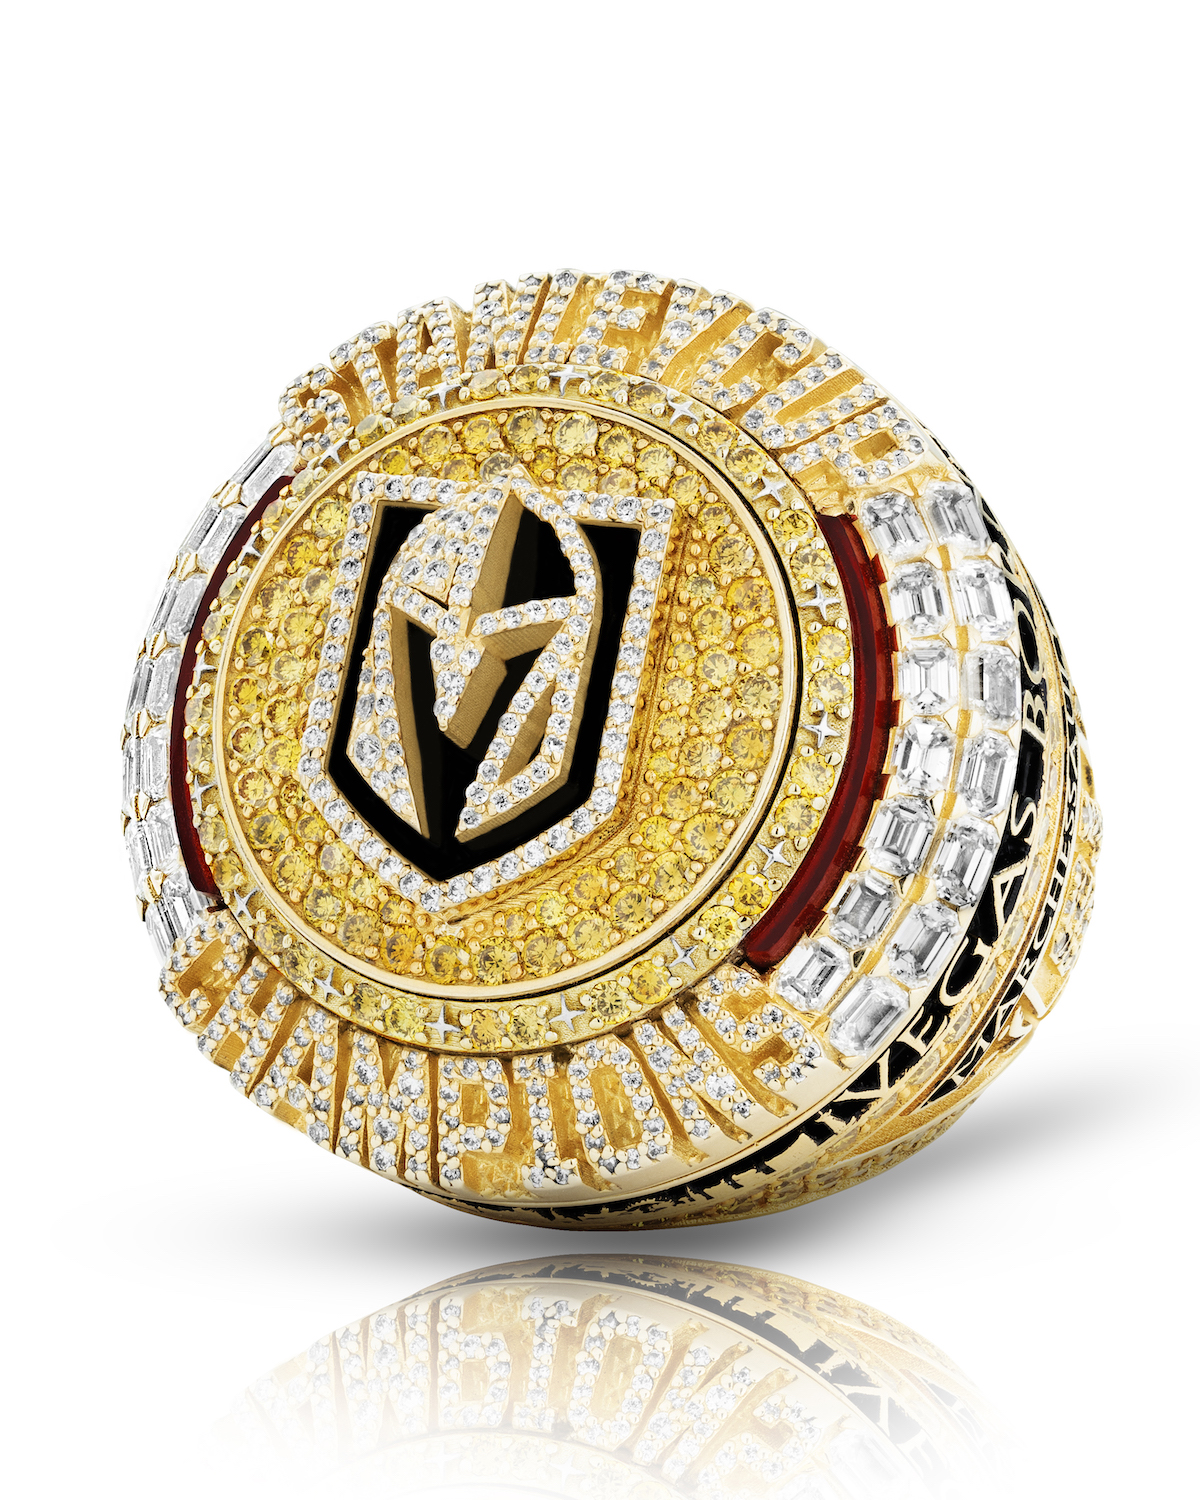 The Los Angeles Rams Super Bowl LVI Ring Has the Most Diamond Carat Weight  in Championship Ring History - Only Natural Diamonds